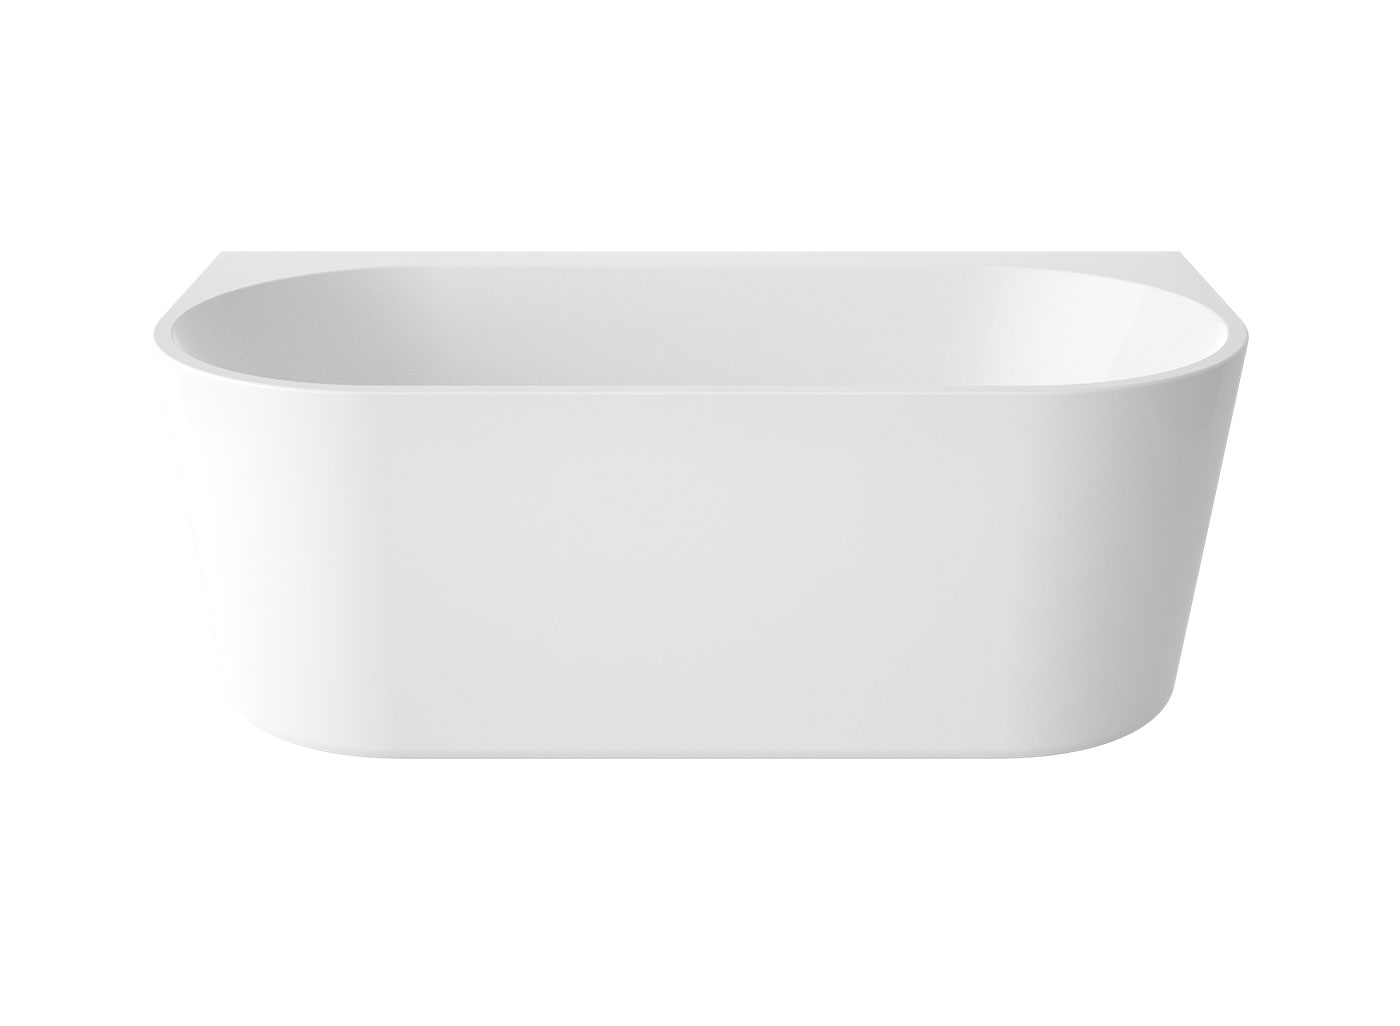 Combine the luxury of a freestanding bath with the practicalities of an island bath. This beautiful oval back to wall bath